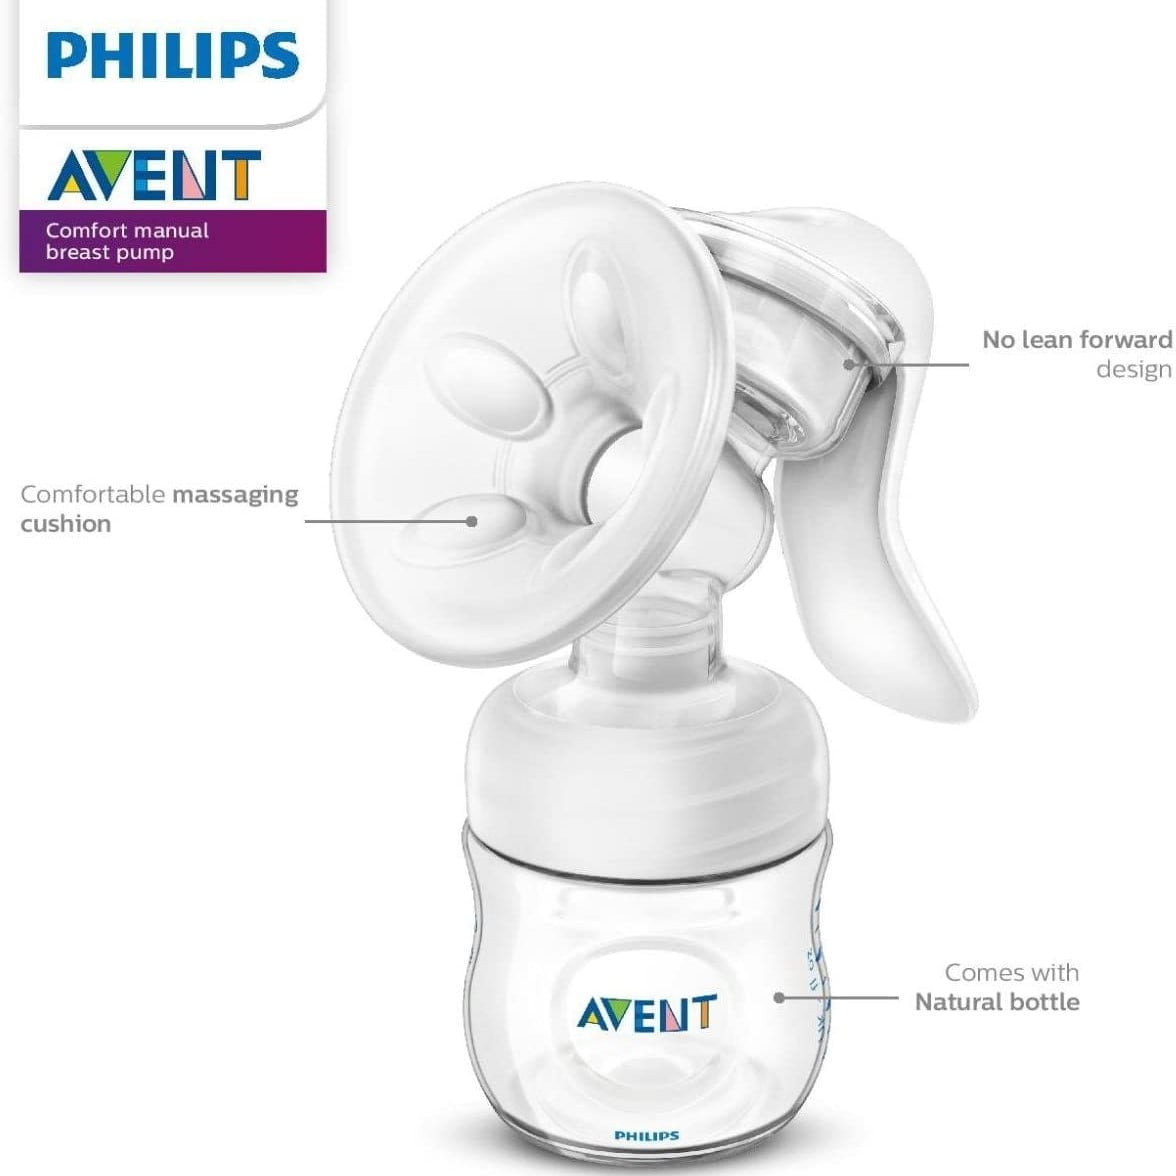 61Nb7E S88L. Ac Sl1300 &Lt;H1&Gt;Philips Avent Breast Scf330/70 Pump Manual, Clear&Lt;/H1&Gt; Https://Www.youtube.com/Watch?V=Opctlnkr3Jq &Lt;Ul Class=&Quot;A-Unordered-List A-Vertical A-Spacing-Mini&Quot;&Gt; &Lt;Li&Gt;&Lt;Span Class=&Quot;A-List-Item&Quot;&Gt;Brand: Philips Avent&Lt;/Span&Gt;&Lt;/Li&Gt; &Lt;Li&Gt;&Lt;Span Class=&Quot;A-List-Item&Quot;&Gt;Type: Breast Pump&Lt;/Span&Gt;&Lt;/Li&Gt; &Lt;Li&Gt;&Lt;Span Class=&Quot;A-List-Item&Quot;&Gt;Made Up Of Bpa Free Materials&Lt;/Span&Gt;&Lt;/Li&Gt; &Lt;Li&Gt;&Lt;Span Class=&Quot;A-List-Item&Quot;&Gt;The Soft Cushion Comfortably Cradles Your Breast For A Fluid And Pleasant Experience&Lt;/Span&Gt;&Lt;/Li&Gt; &Lt;/Ul&Gt; Massage Cushion Has A New Soft Velvety Texture That Gives A Warm Feel To The Skin For Comfortable, Gentle Stimulation Of Your Milk Flow. The Cushion Is Designed To Gently Mimic Your Baby'S Suckling To Help Stimulate Let Down. The Wide Breast Shaped Nipple Promotes Natural Latch On Similar To The Breast, Making It Easy For Your Baby To Combine Breast And Bottle Feeding. Breast Pump Philips Avent Manual Breast Pump